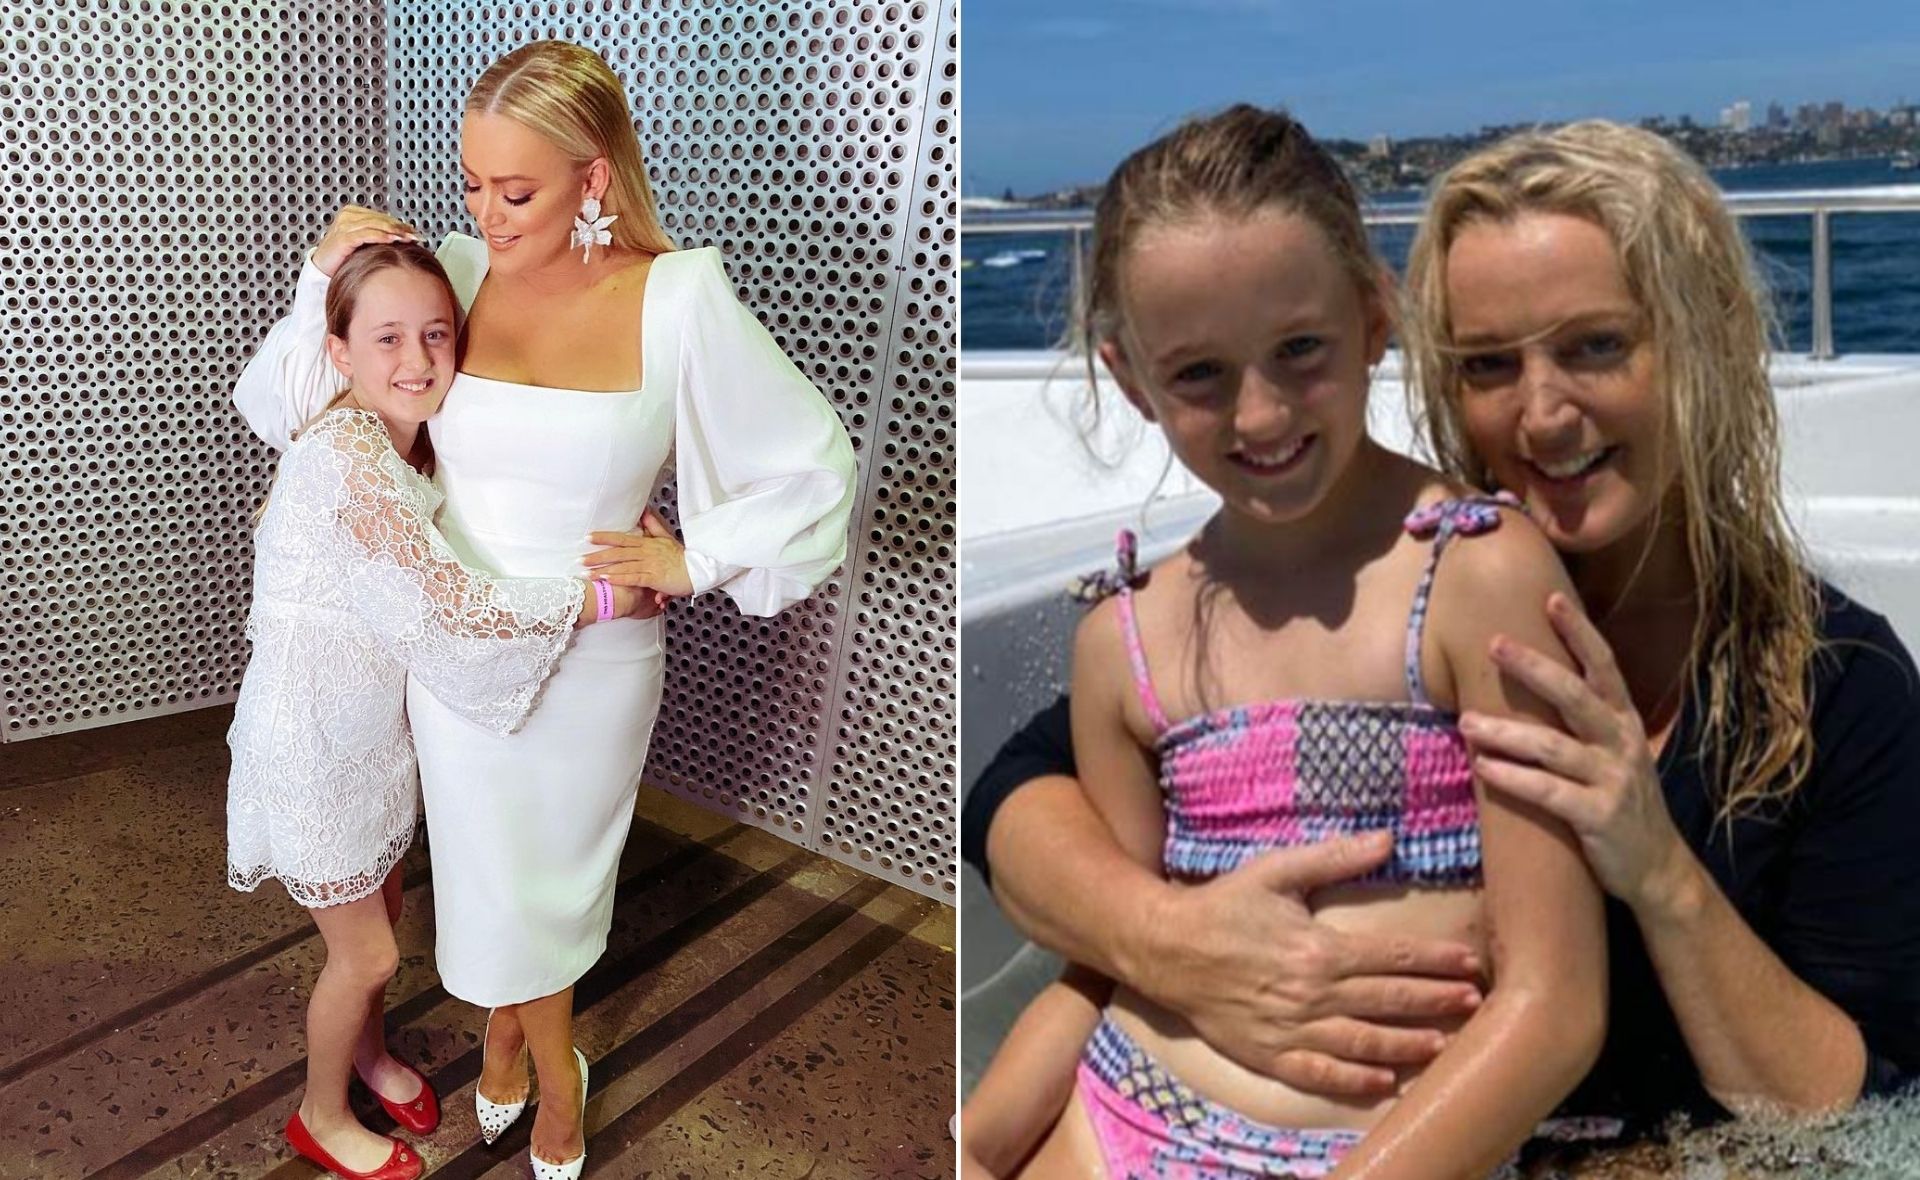 Blonde beauties: Jackie O’s daughter Kitty is her ultimate mini-me in these sweet snaps